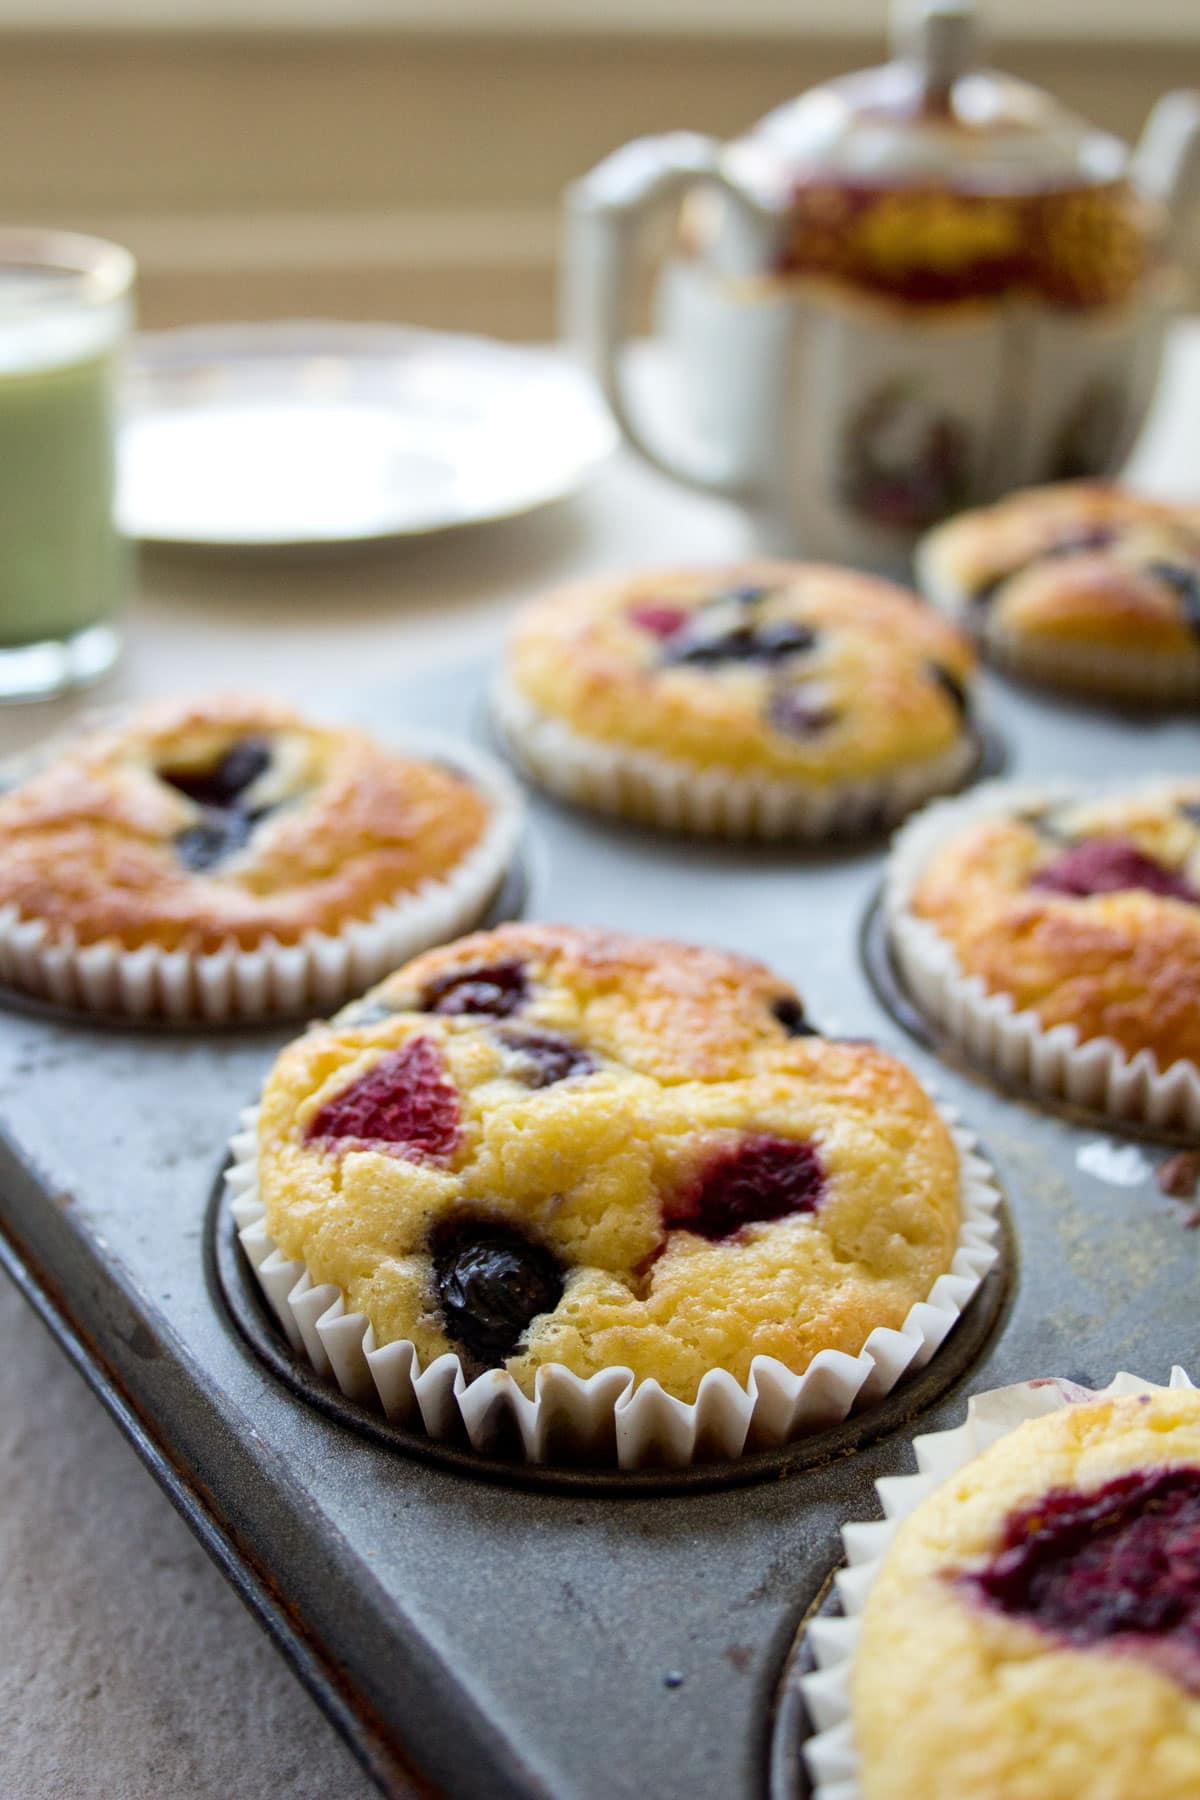 Low carb muffins with berries in a muffin pan.